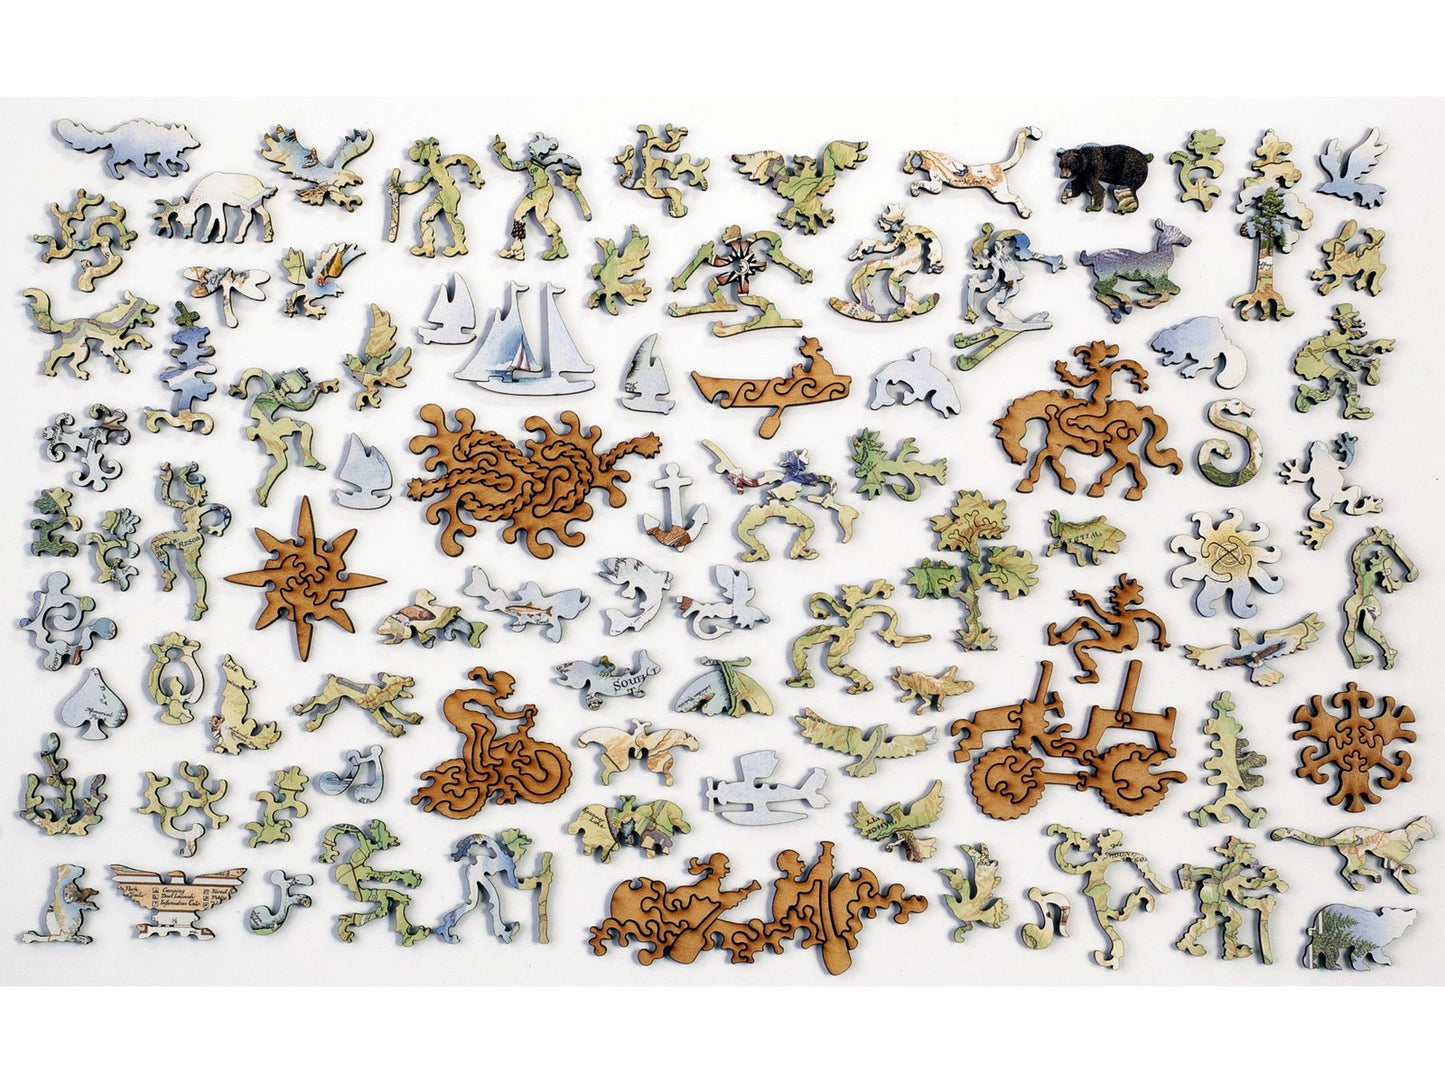 The whimsy pieces that can be found in the puzzle, Lake Tahoe Map.